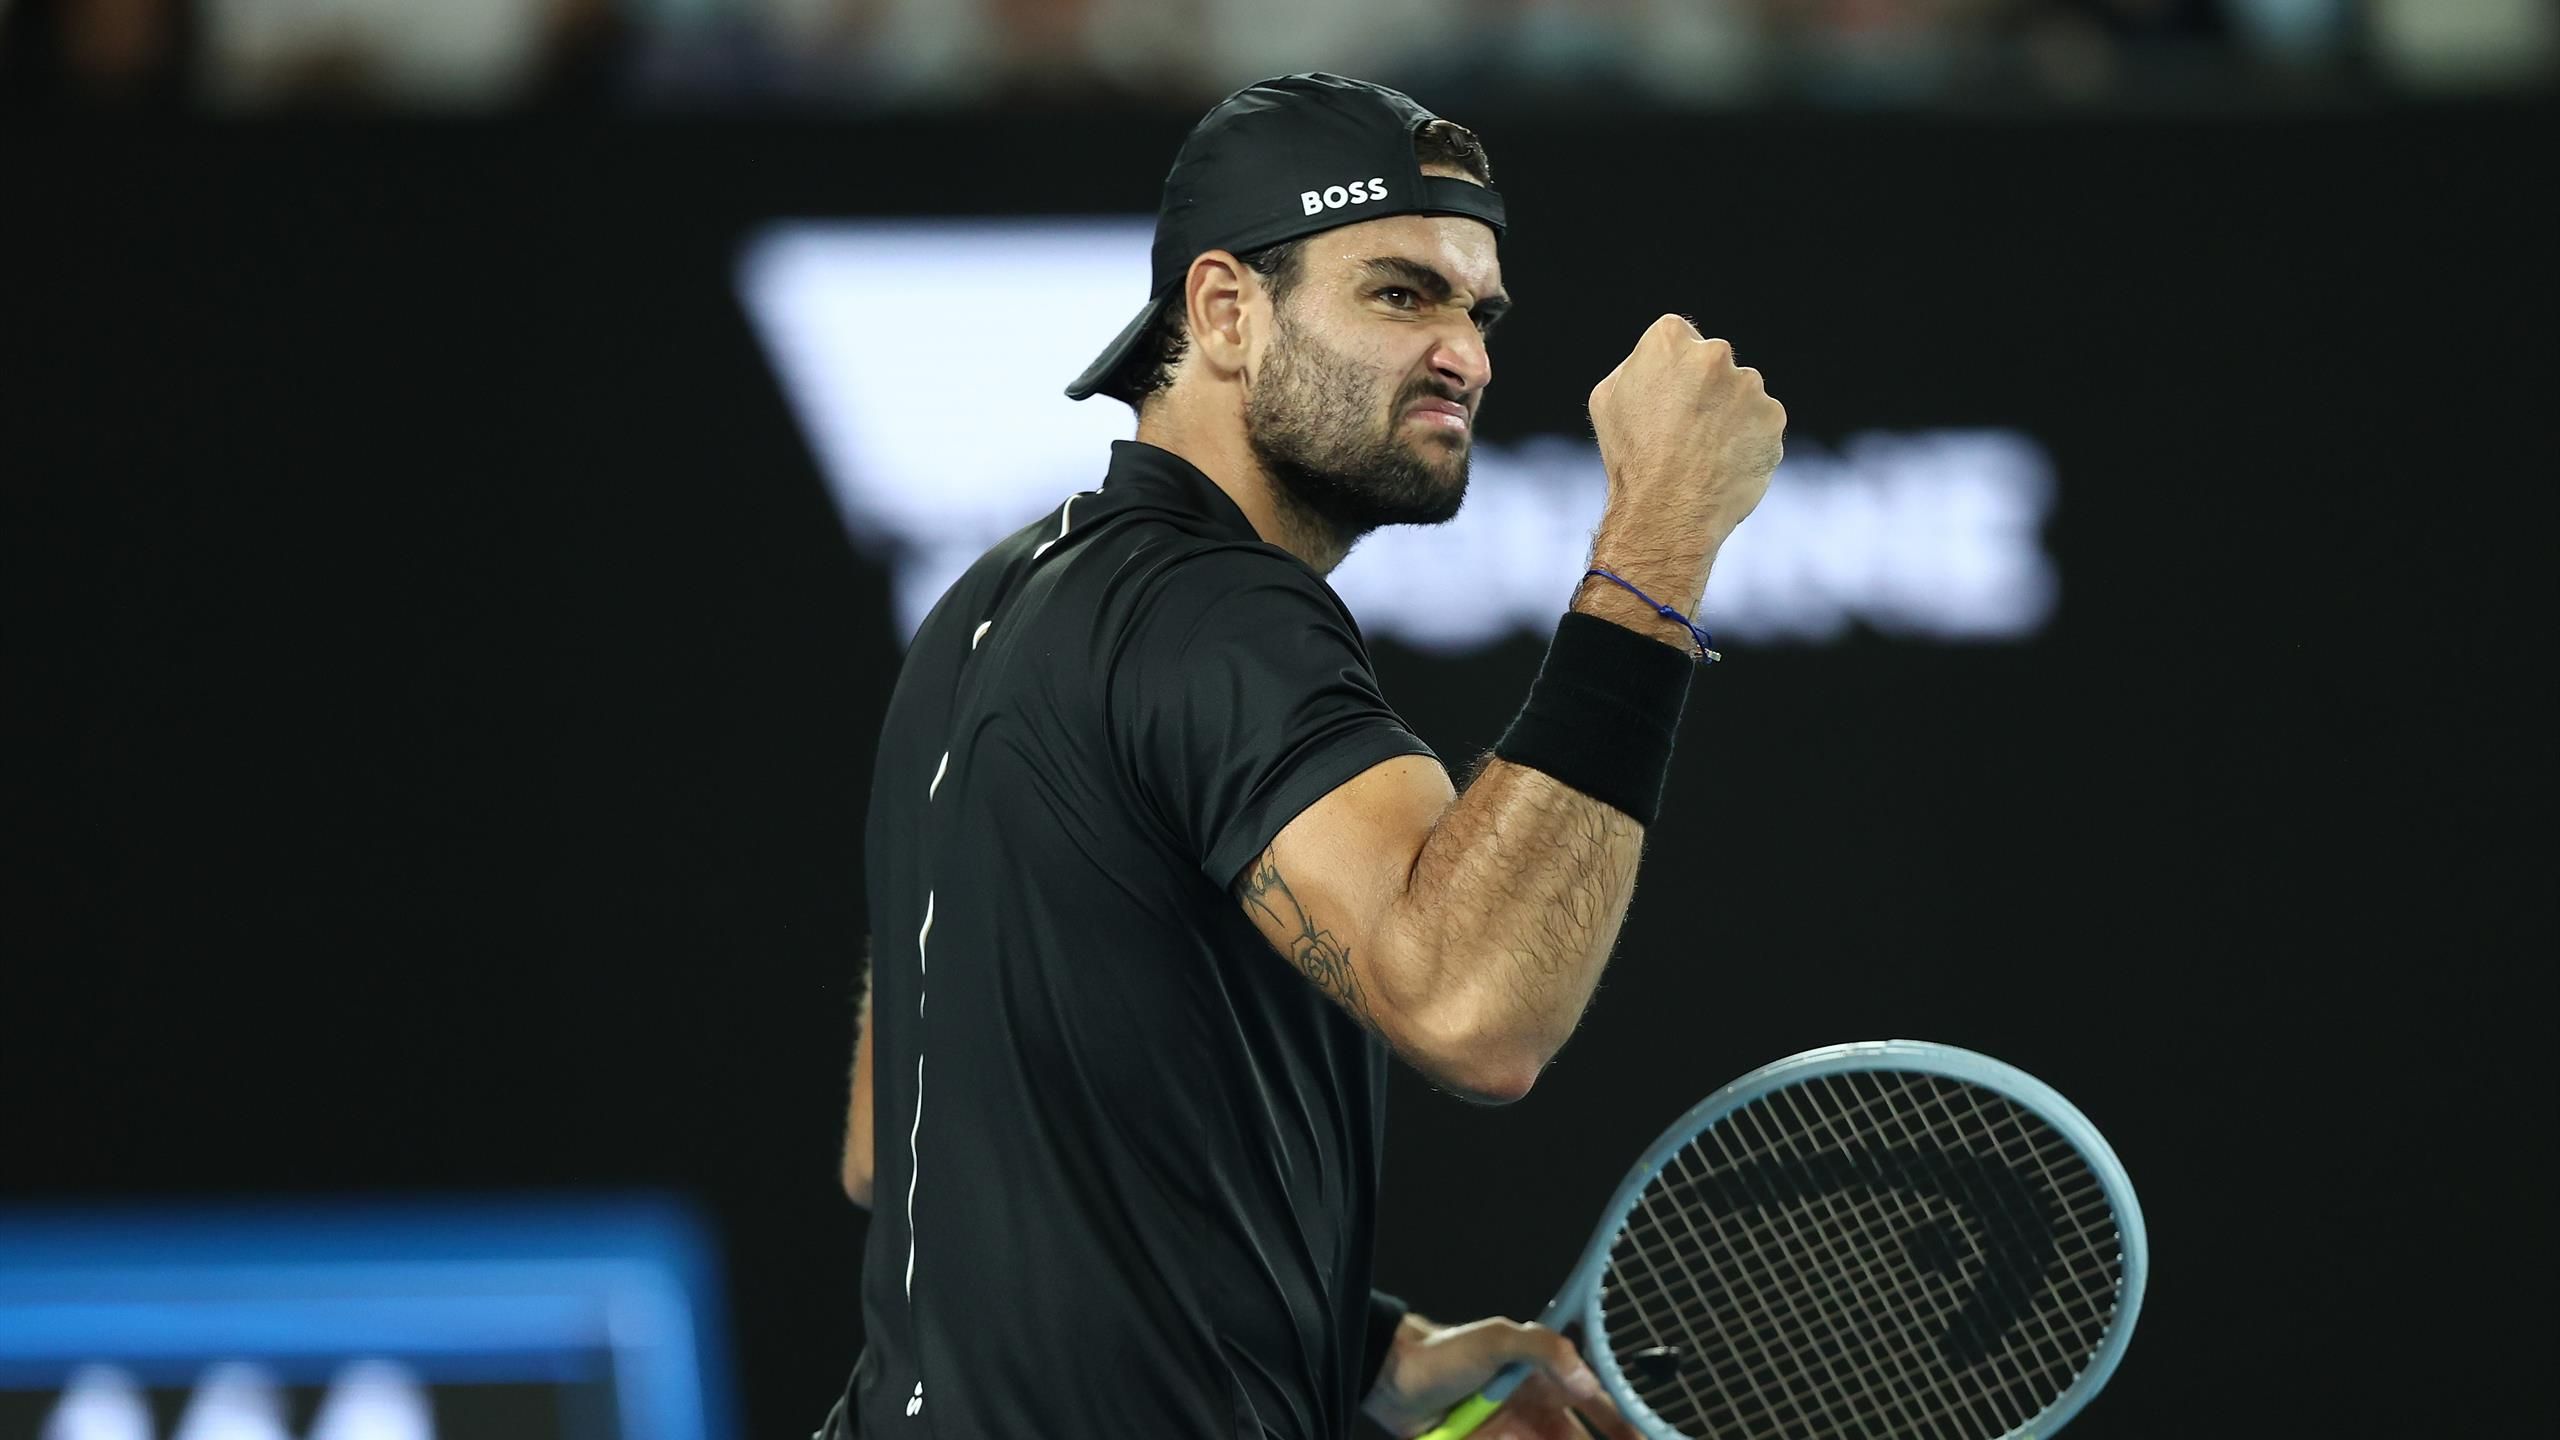 Matteo Berrettini withstands comeback to beat Gael Monfils and set up Australian Open semi-final against Rafael Nadal